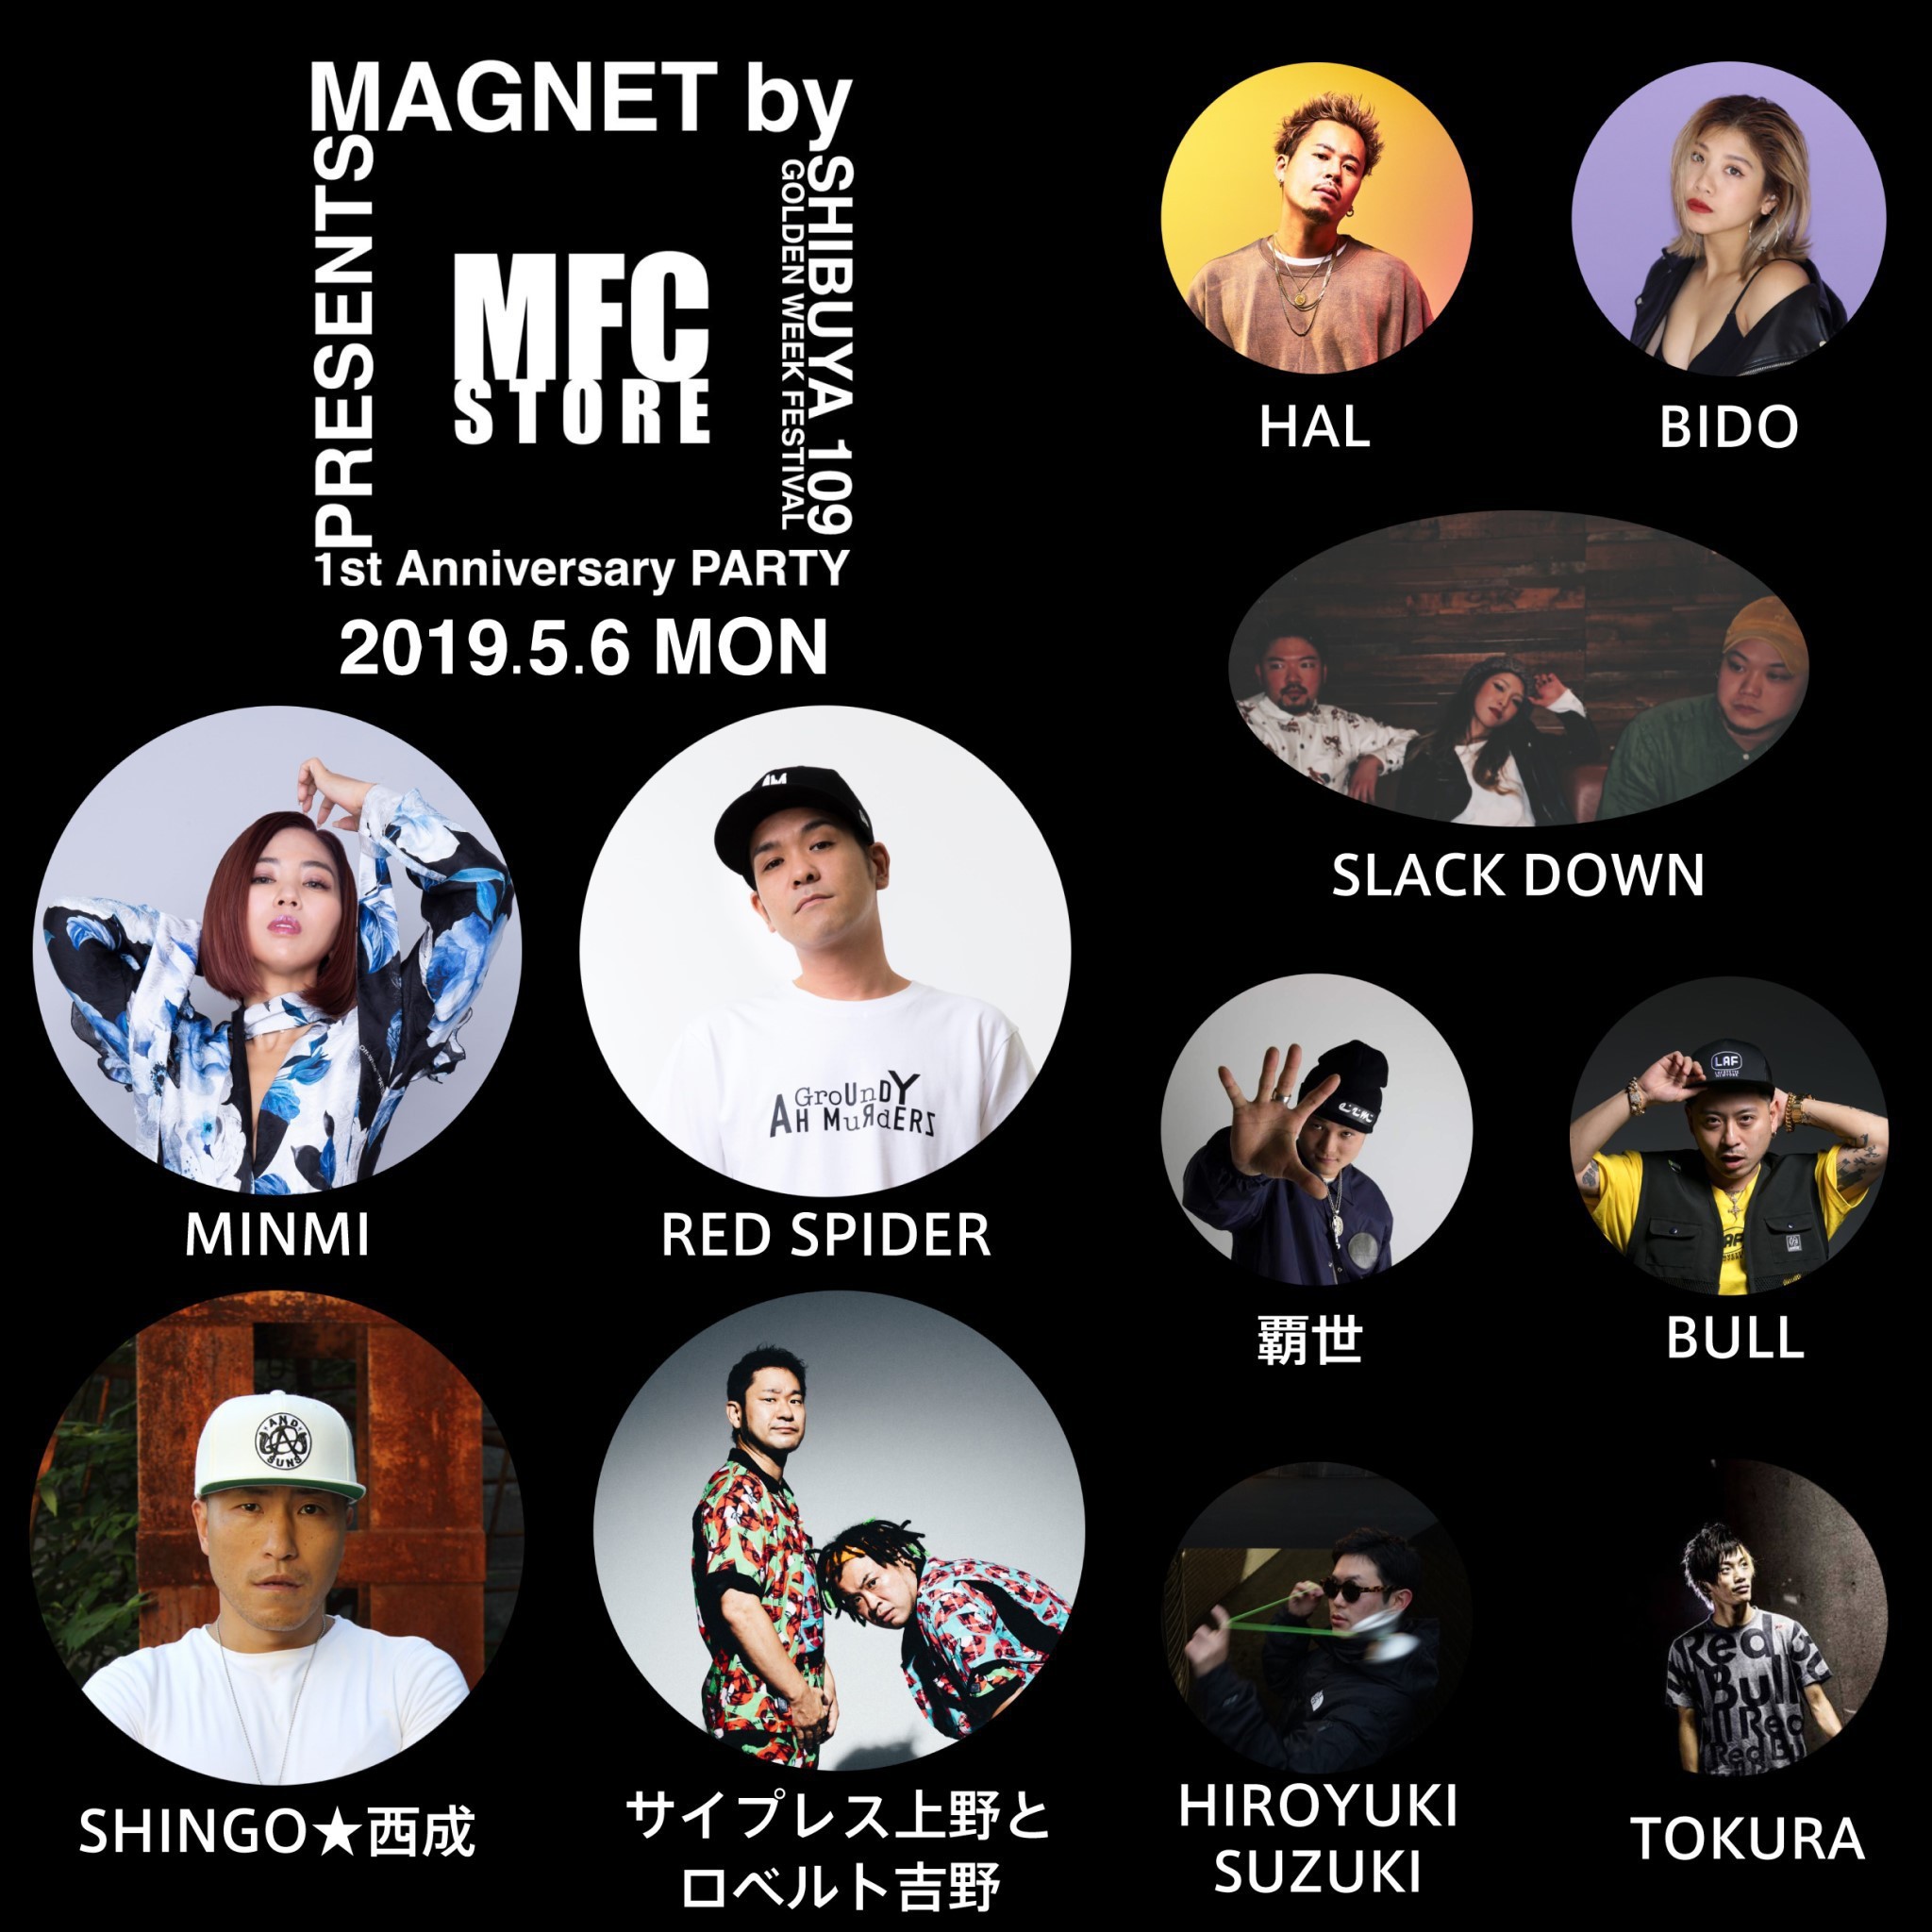 MFC STORE Presents MAGNET by SHIBUYA109 GW FES -1st Anniversary PARTY-